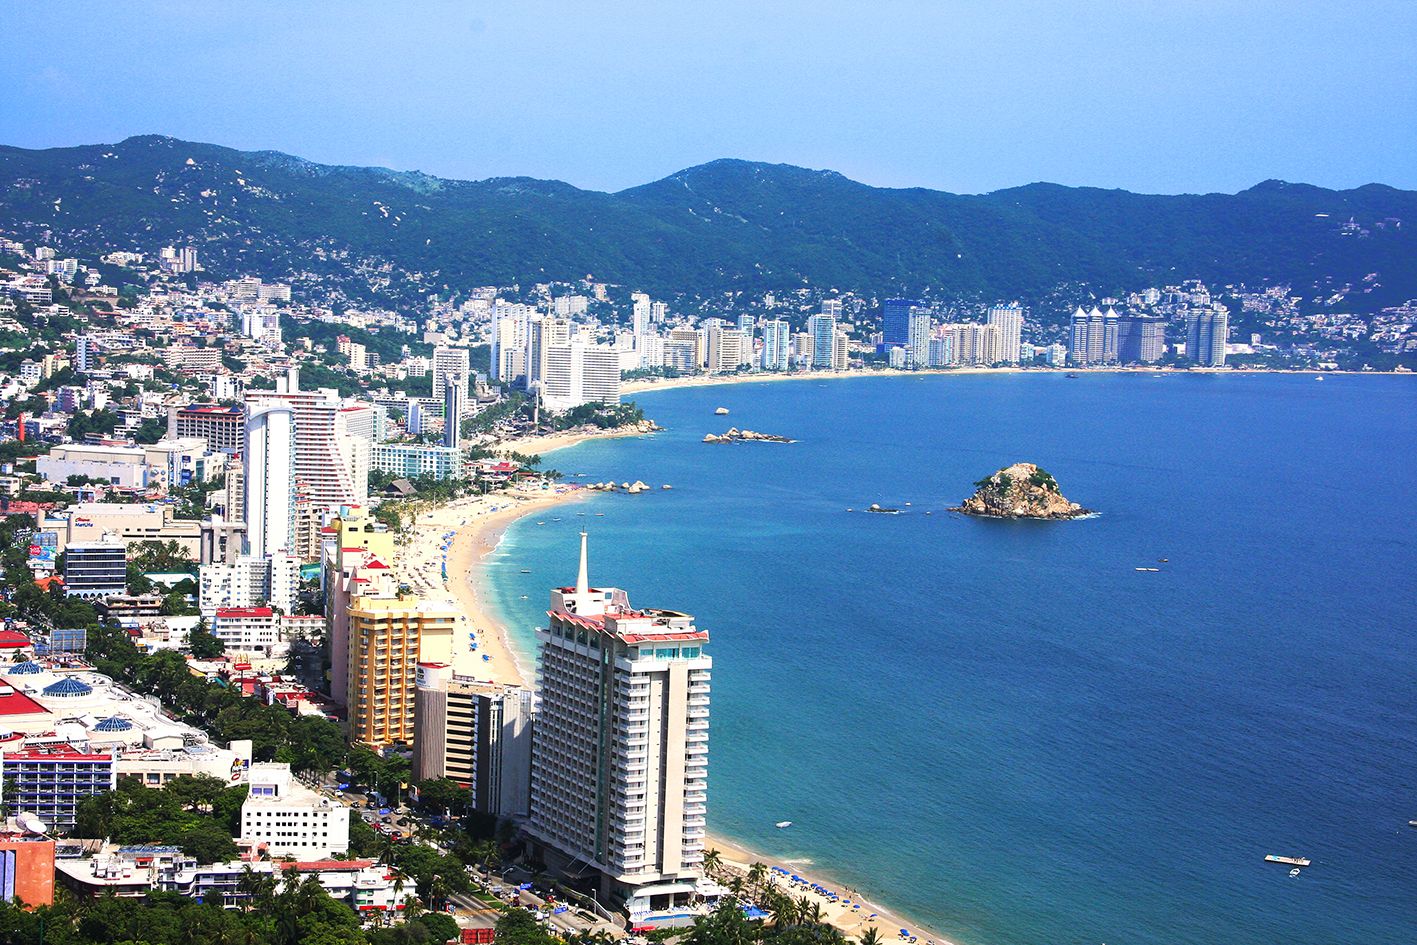 New flights from Acapulco